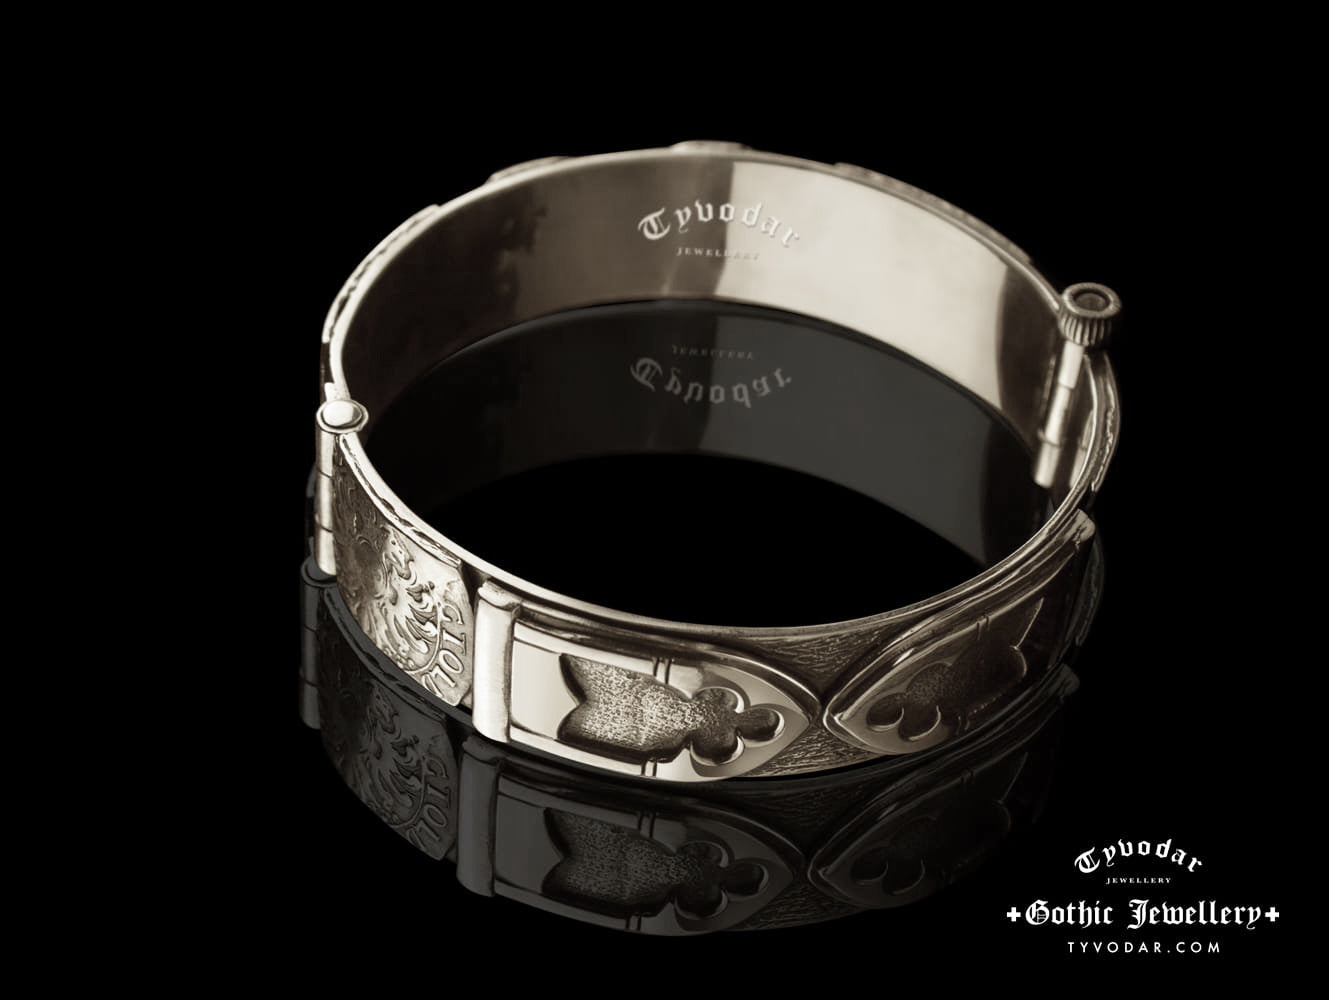 CATHEDRAL | SILVER GOTHIC BRACELET | TYVODAR